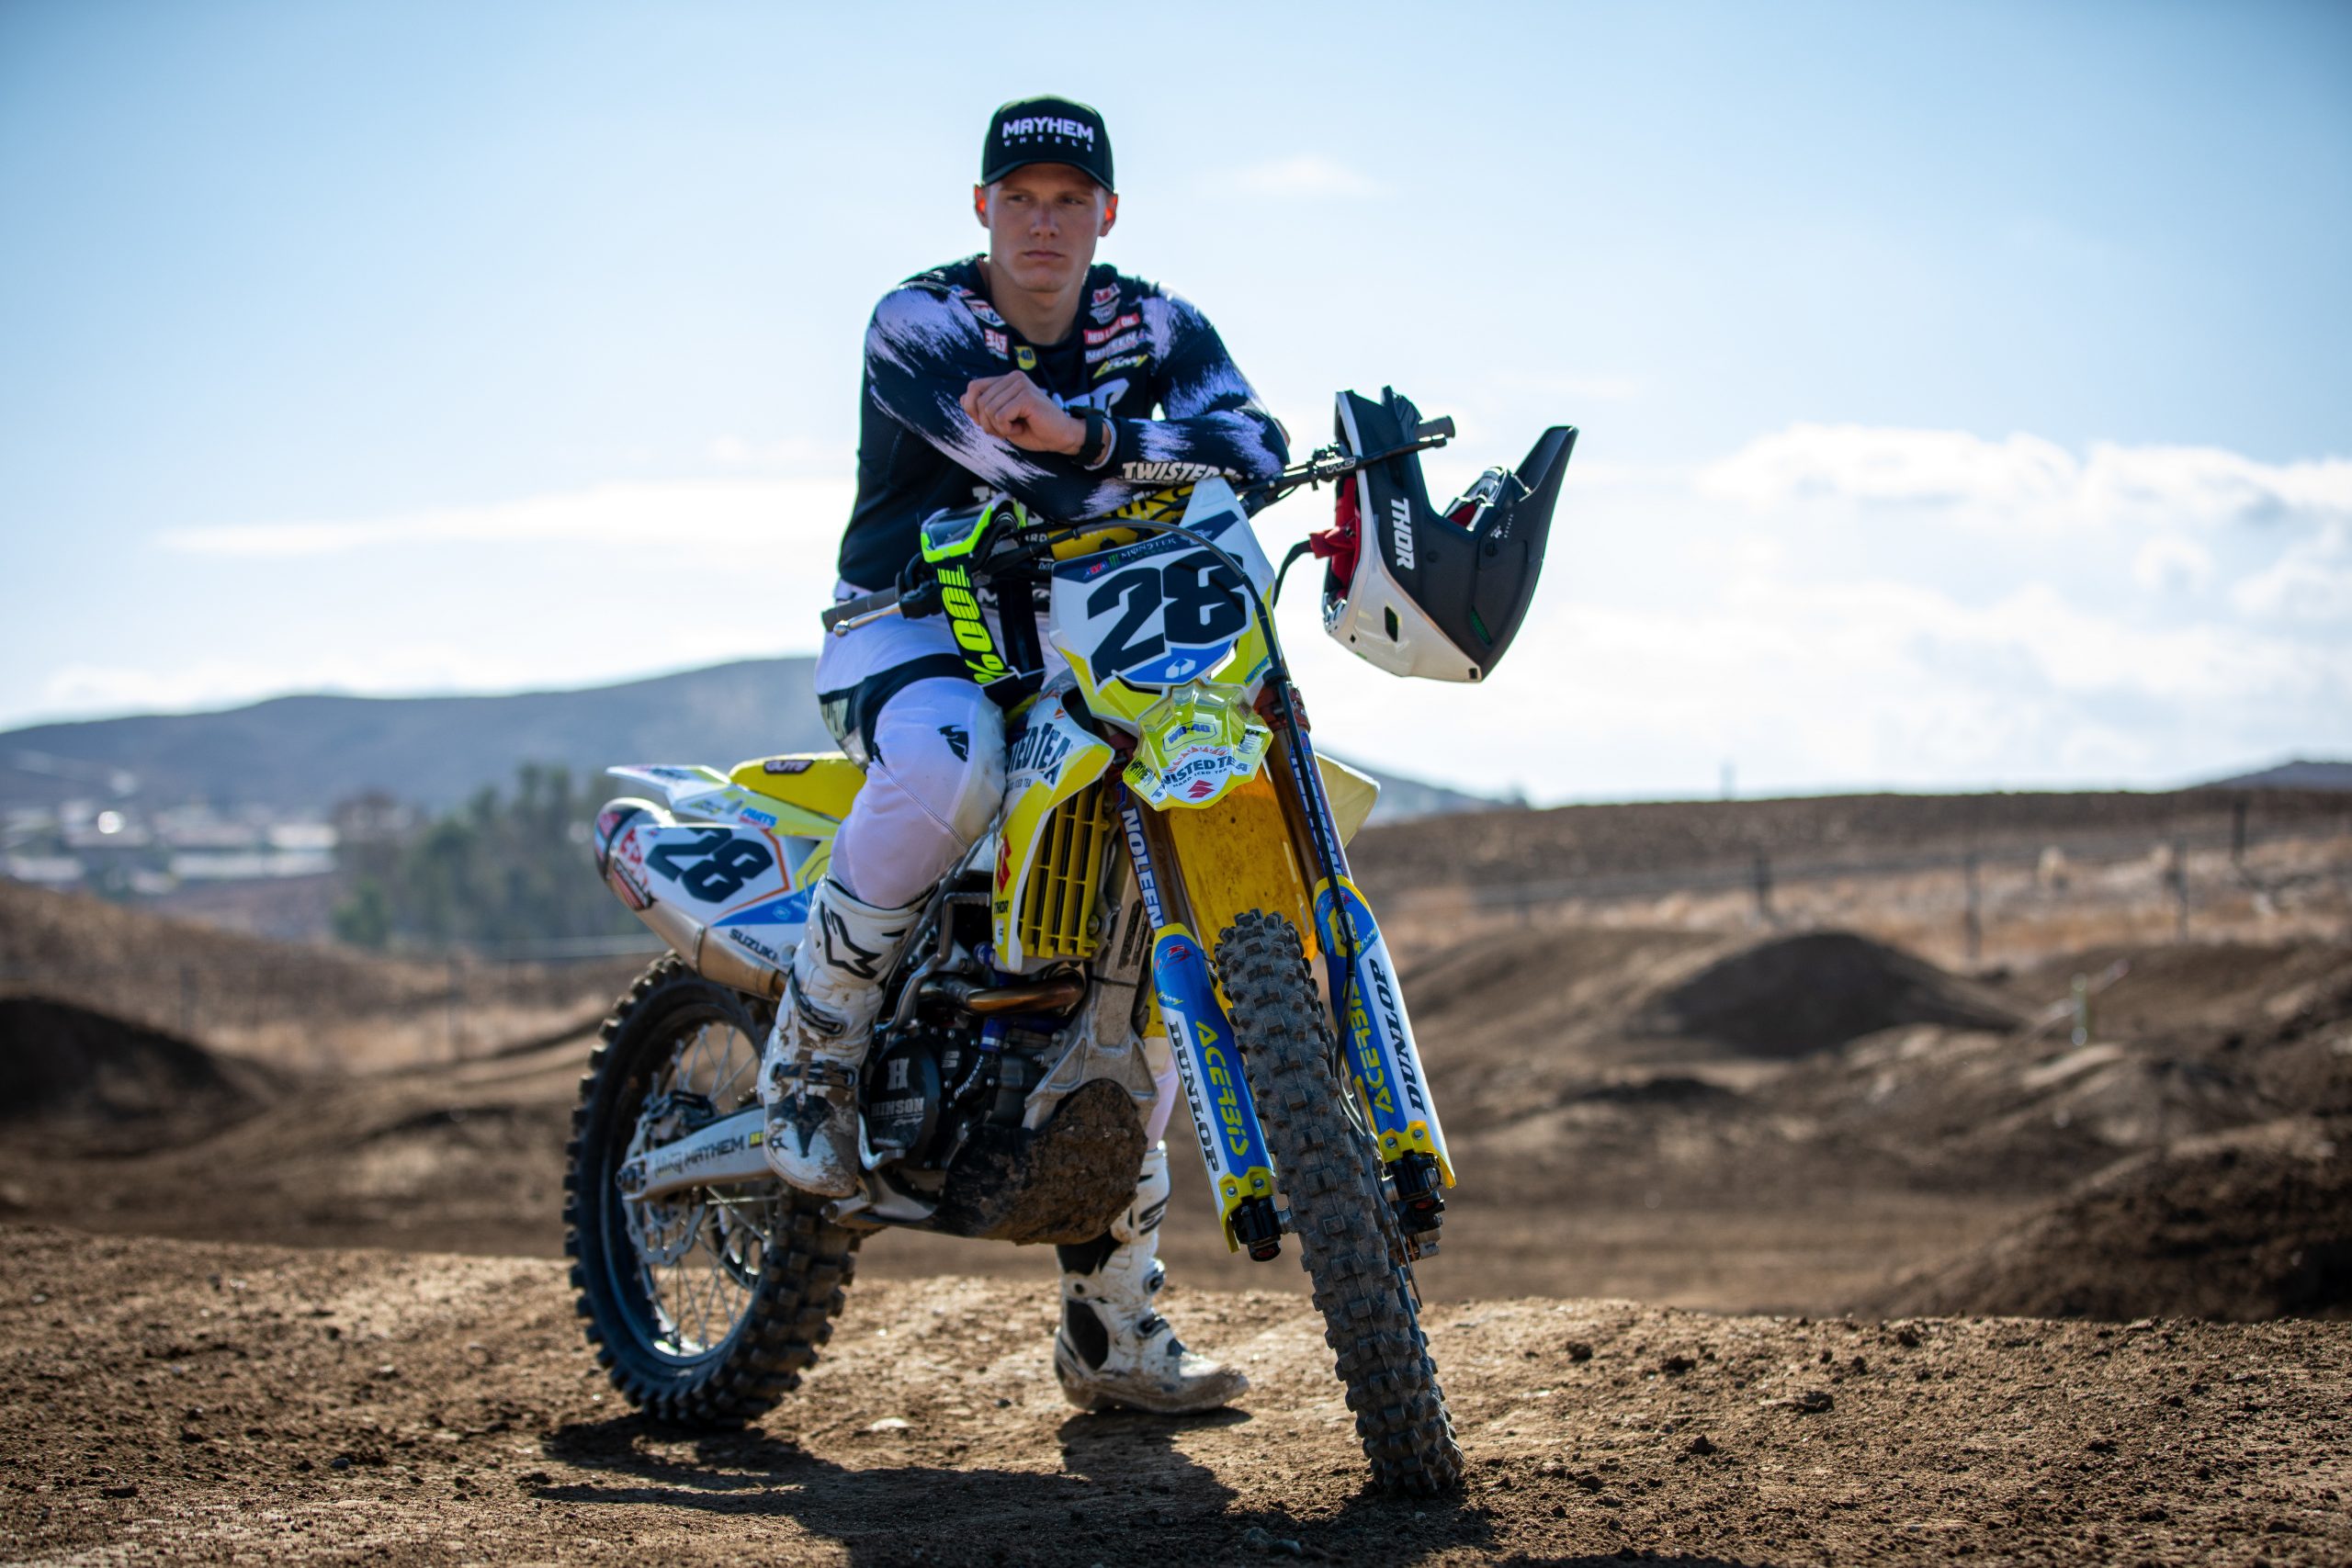 Max Anstie (28) is ready to build on his strong racing performance in 2020